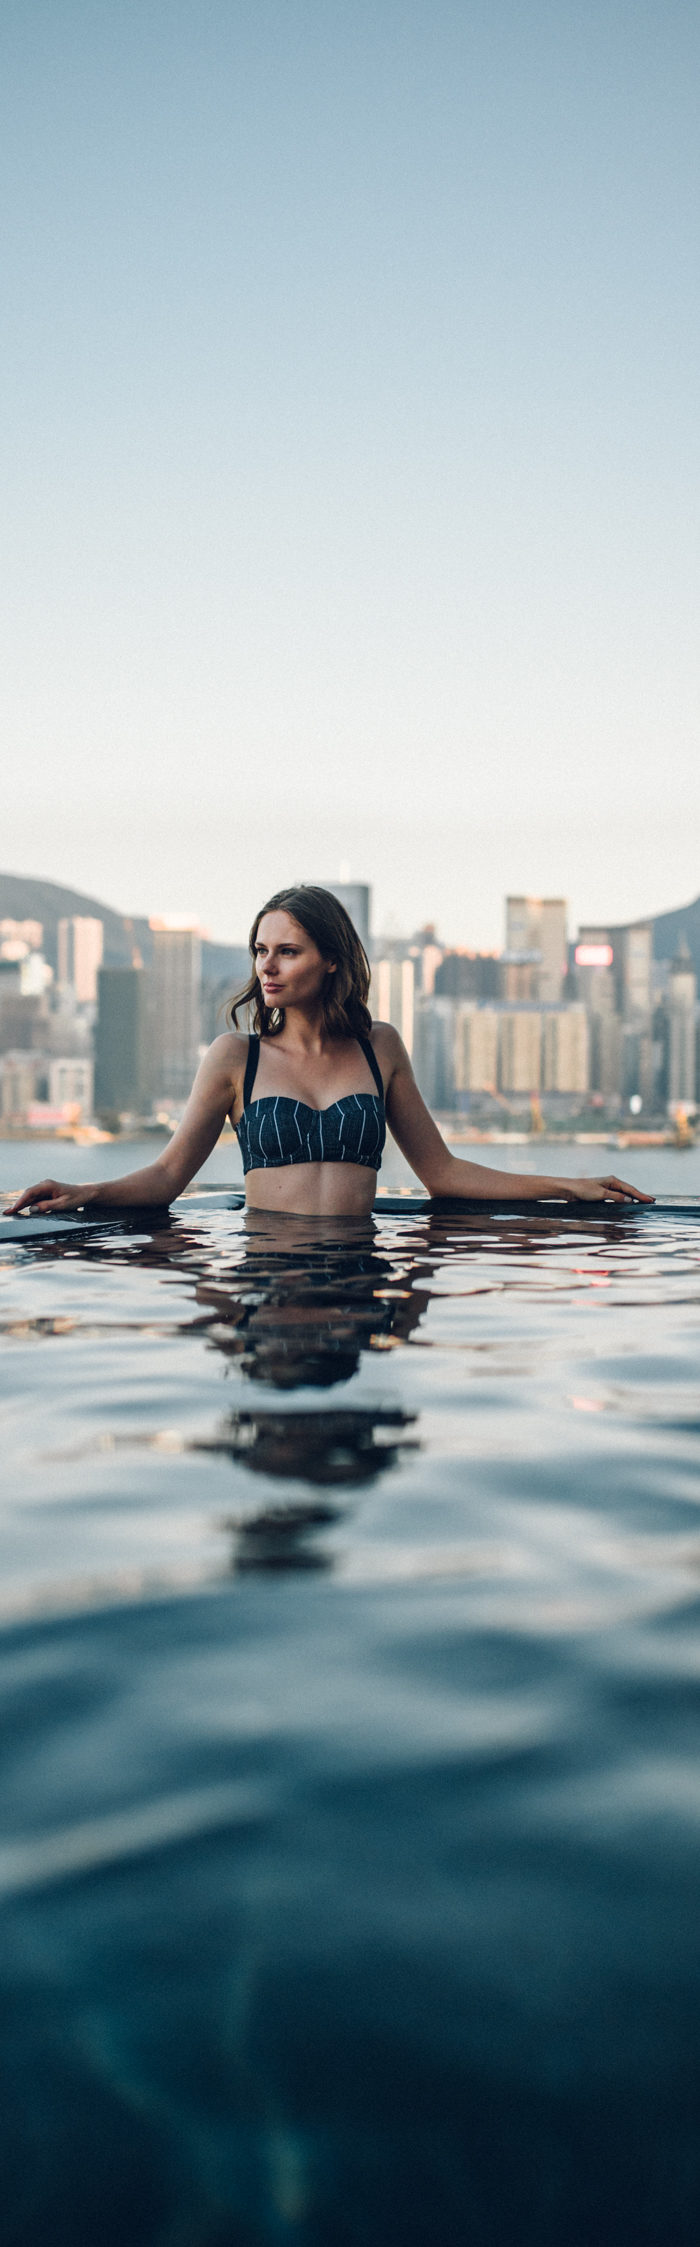 Miss USA 2011 Alyssa Campanella of The A List blog visits Rosewood Hong Kong residences in Tsim Sha Tsui at Holt's Cafe wearing Revel Rey swimwear